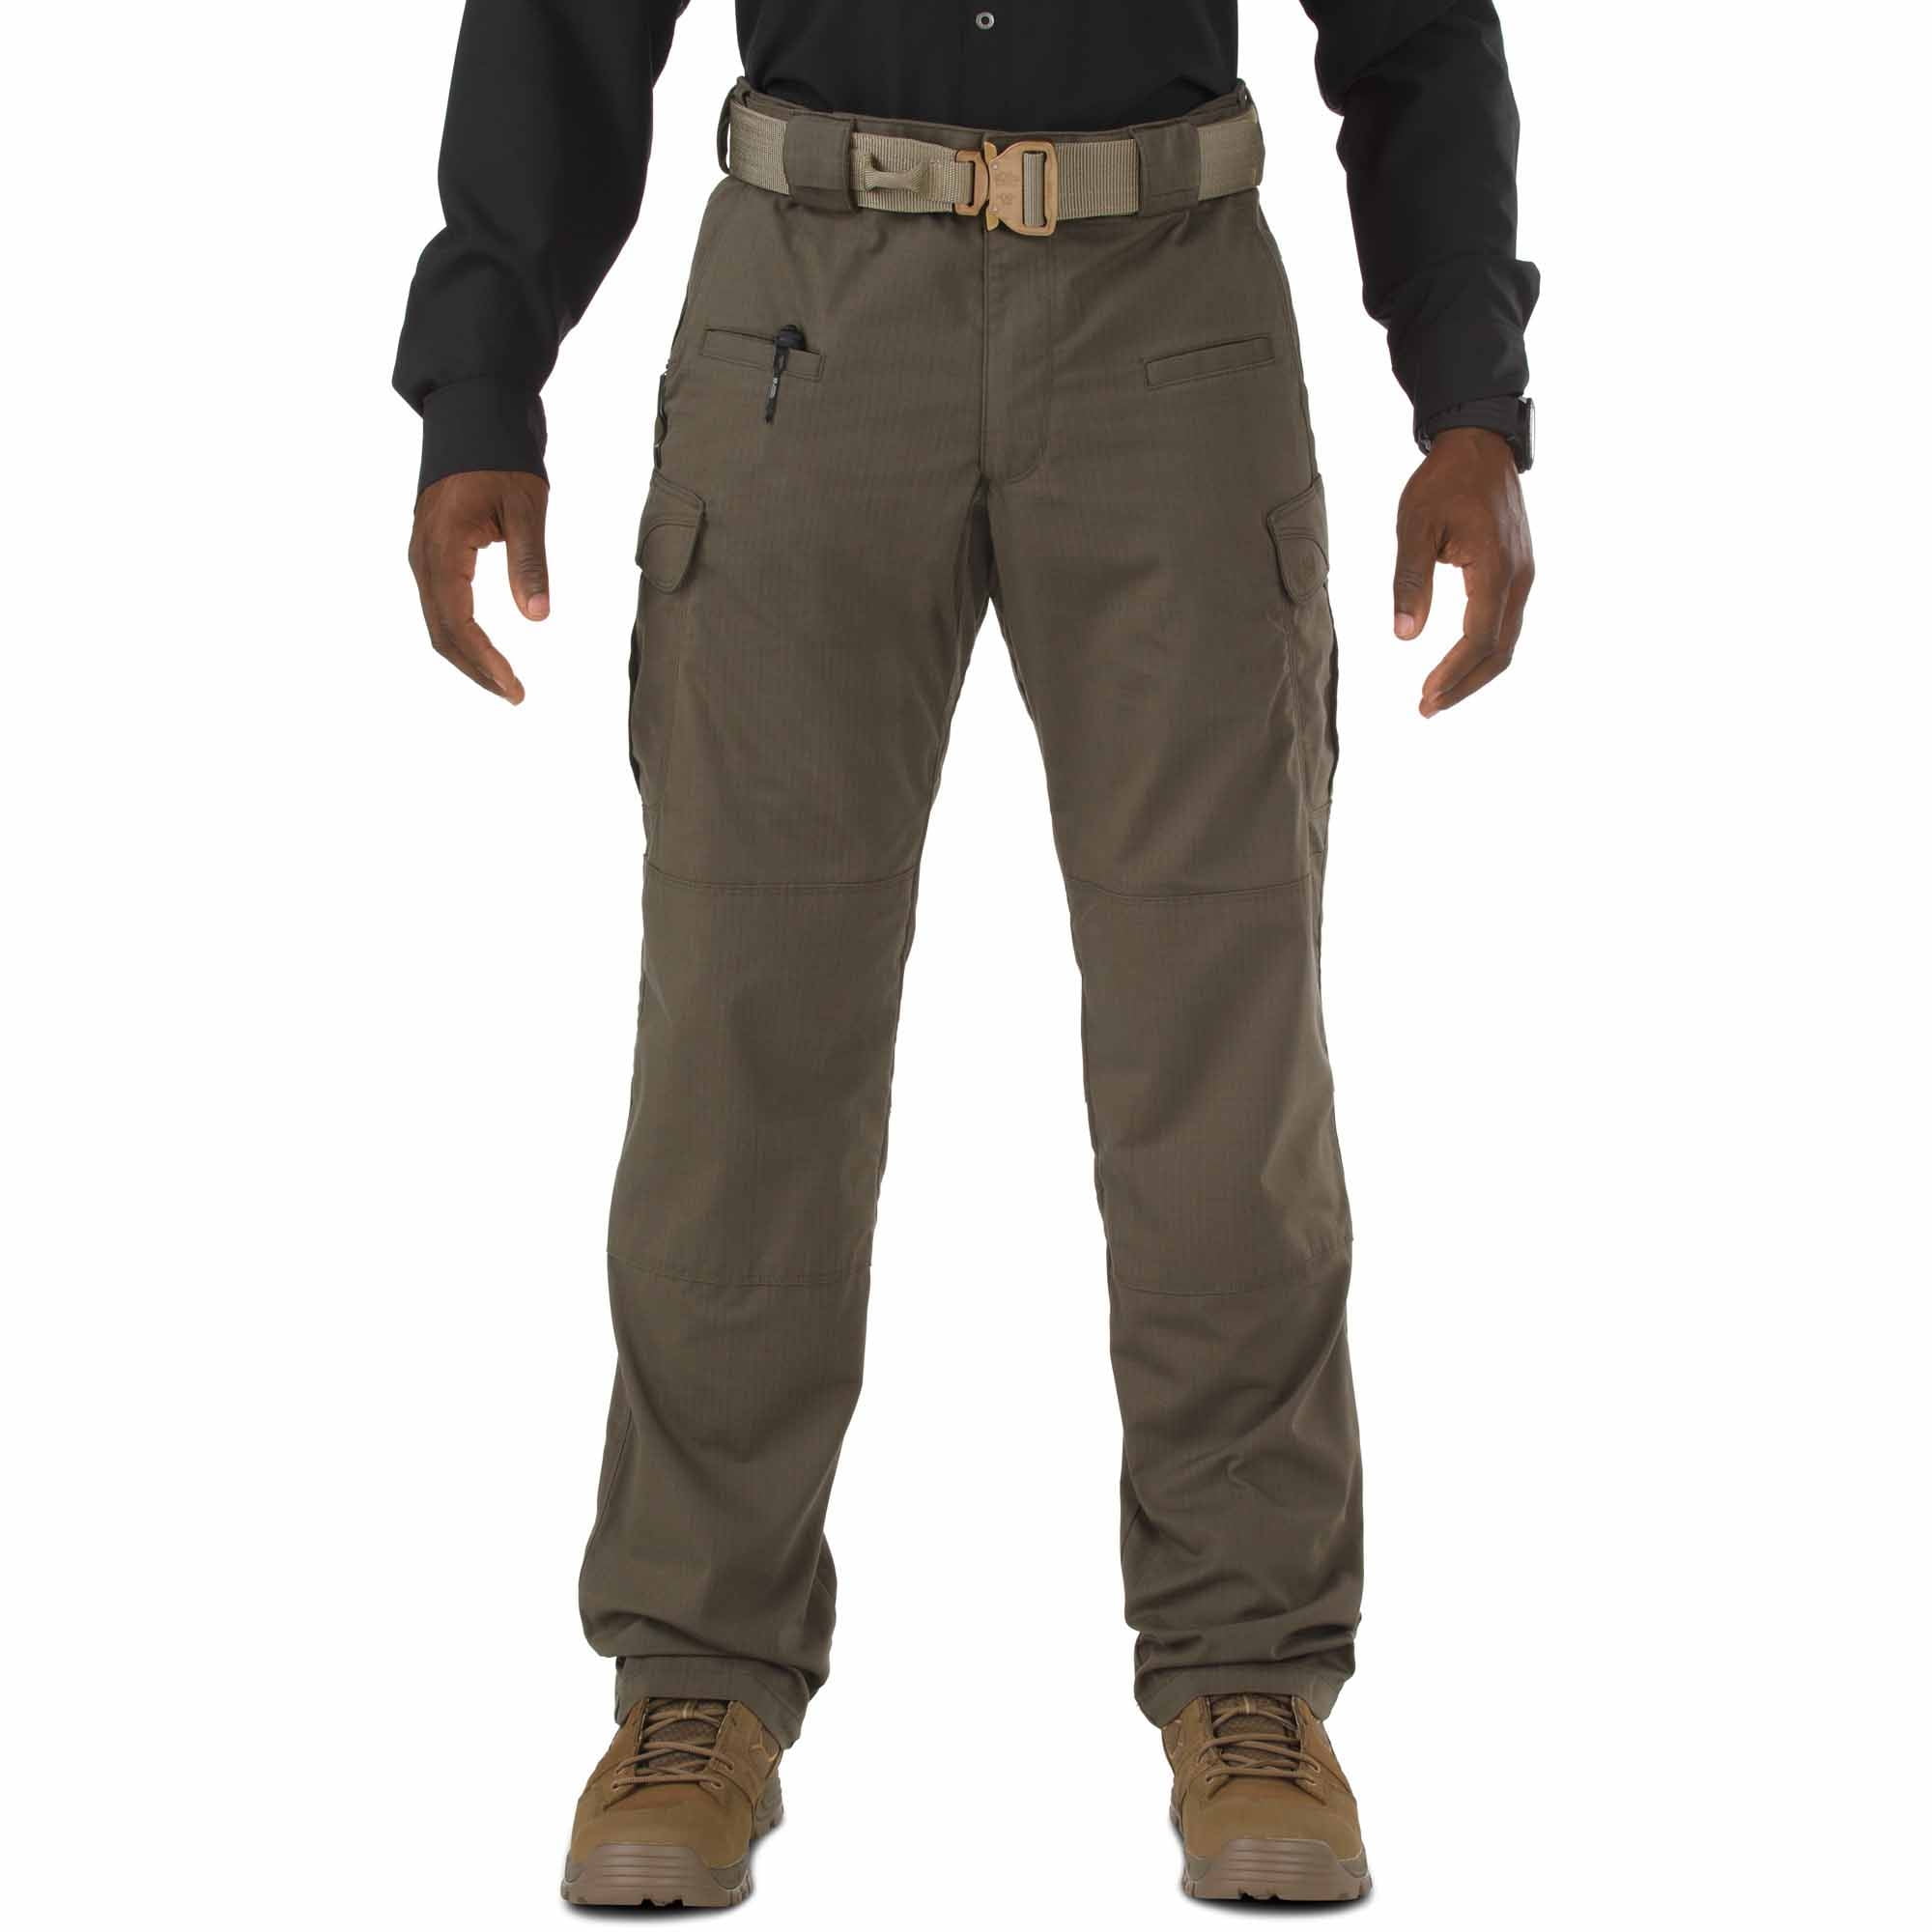 5.11 Tactical Men's Stryke Pants, Adjustable Waistband, Stretchable ...